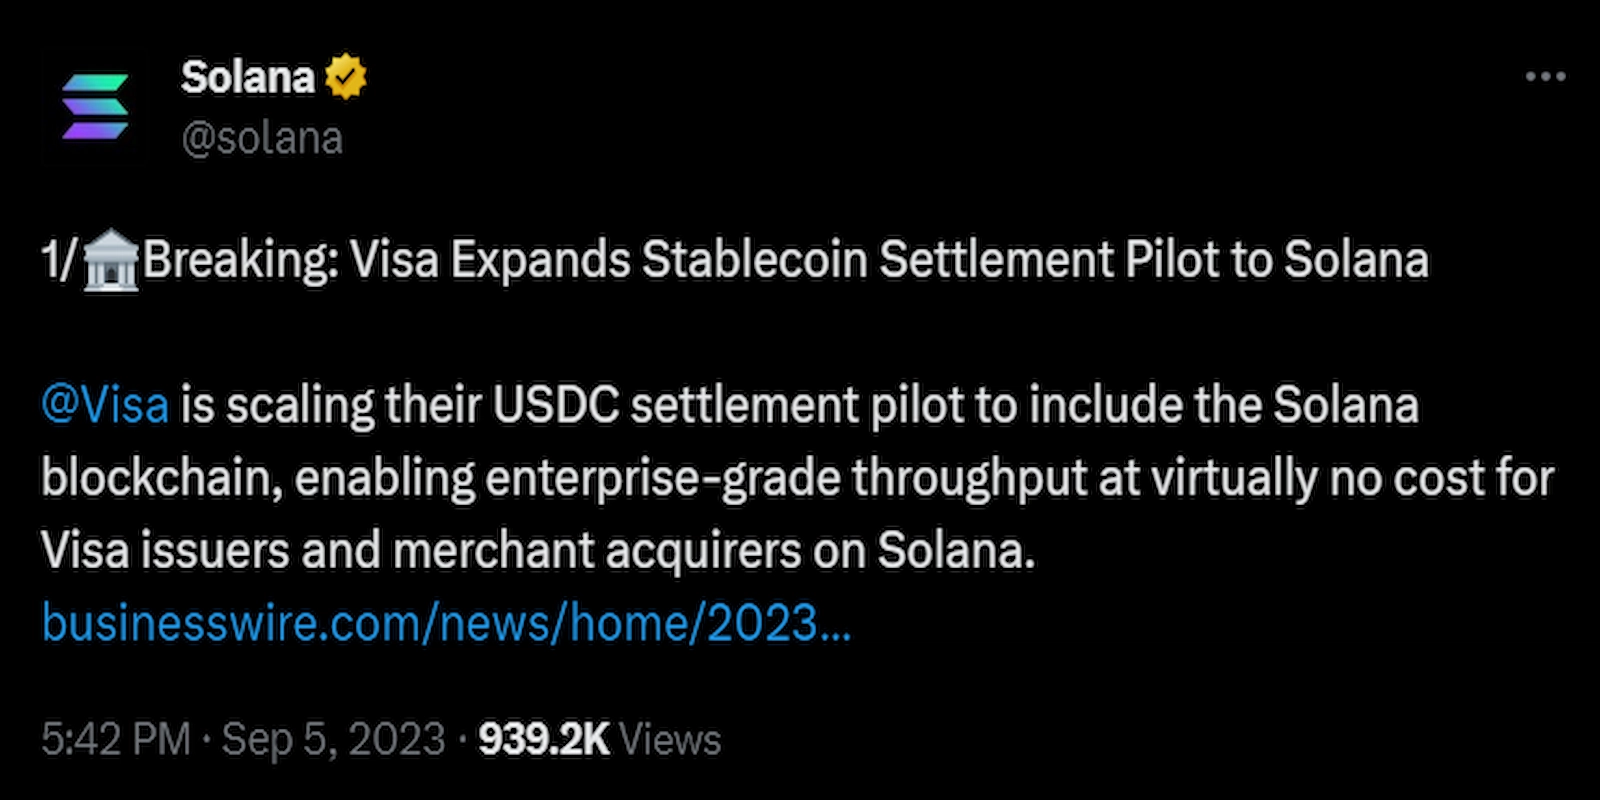 Solana stated that Visa has included it in the firm's USDC settlement pilot